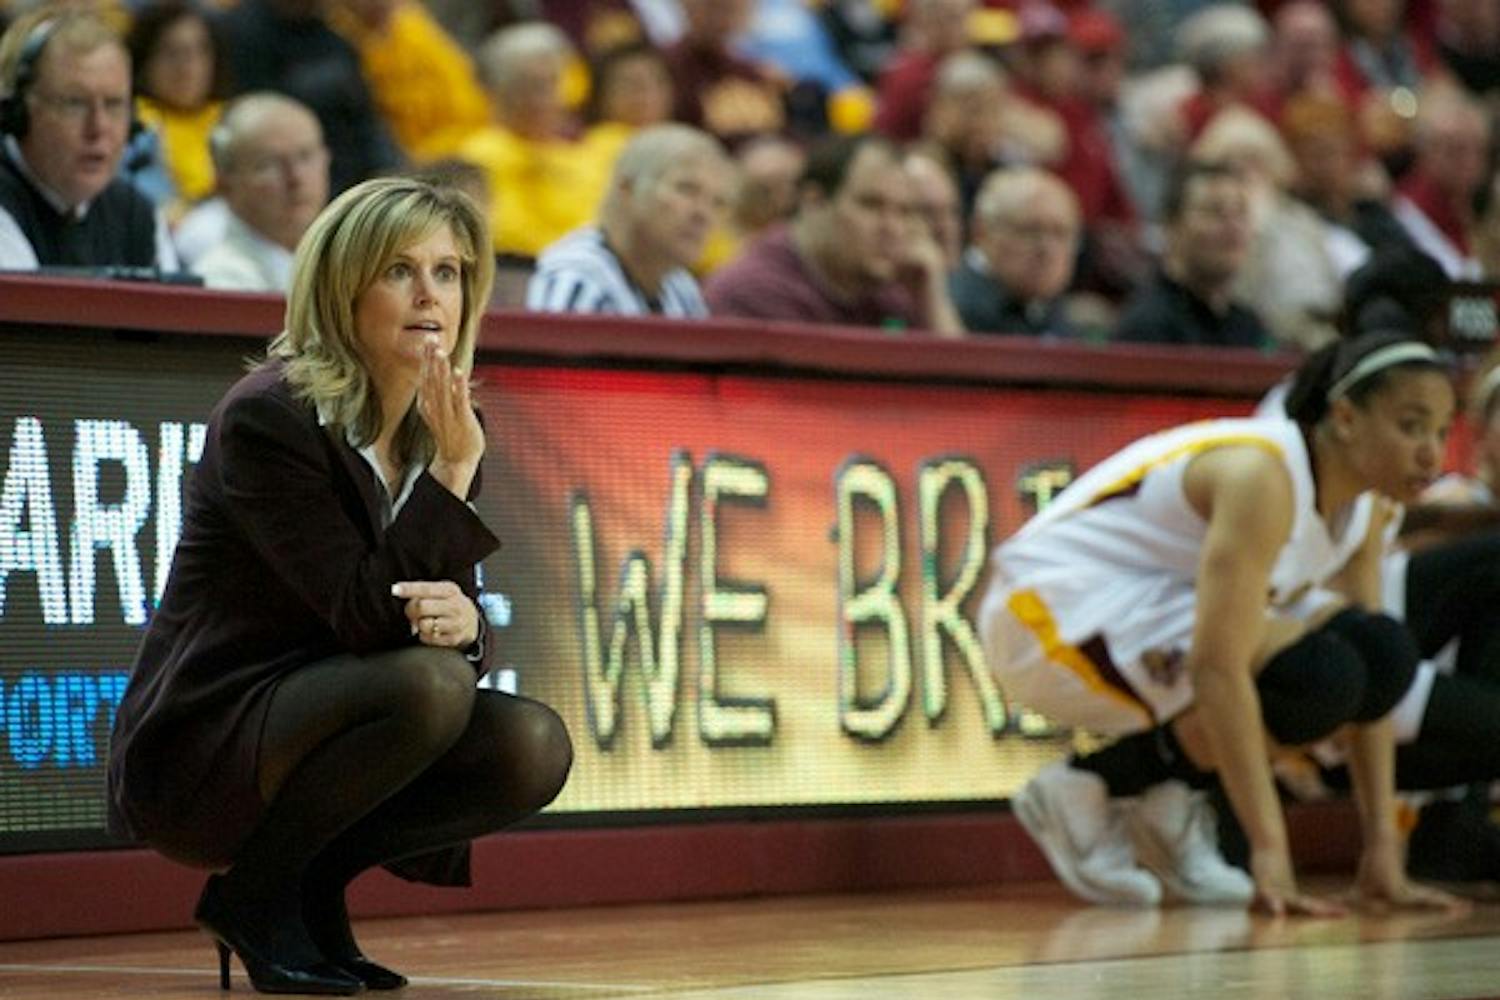 Buckling down: ASU coach Charli Turner Thorne gives out directions during the Feb. 3 game against Stanford while freshman guard Adrienne Thomas waits in the background. The Sun Devils are tied for third in the conference with USC, whom they face on Thursday. (Photo by Michael Arellano)